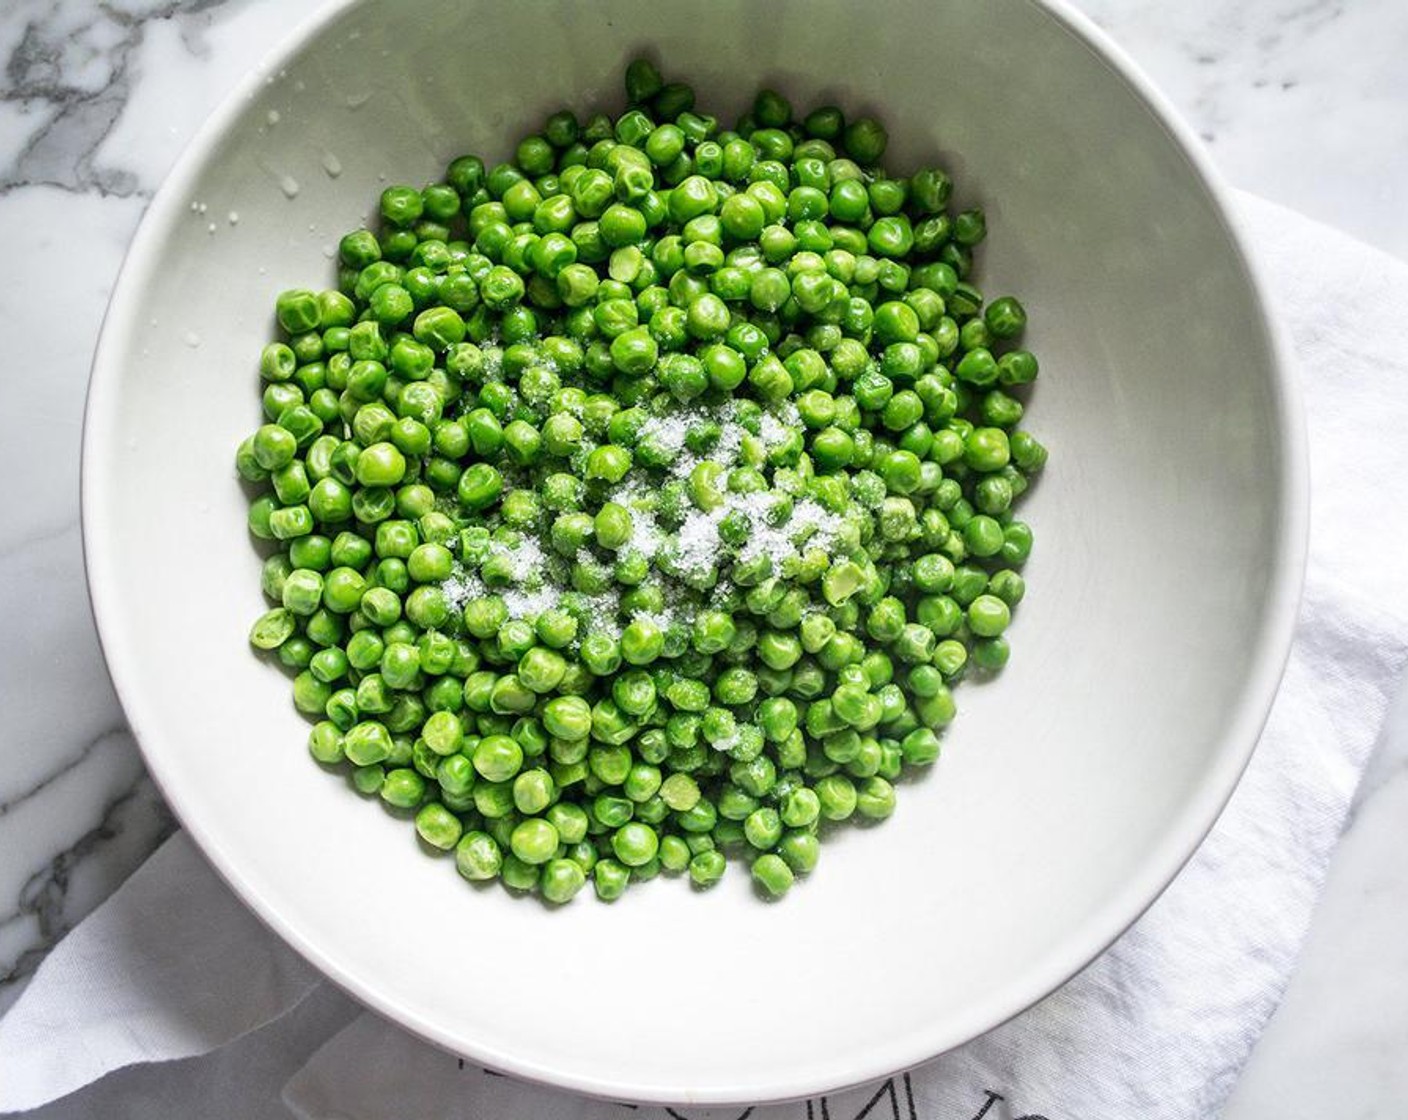 step 3 Add thawed and dried peas to a large bowl, then drizzle with Coconut Oil (1/2 Tbsp). Sprinkle with Sea Salt (1 tsp) and toss to coat, then spread back out in a single layer on a large baking sheet lined with aluminum foil.